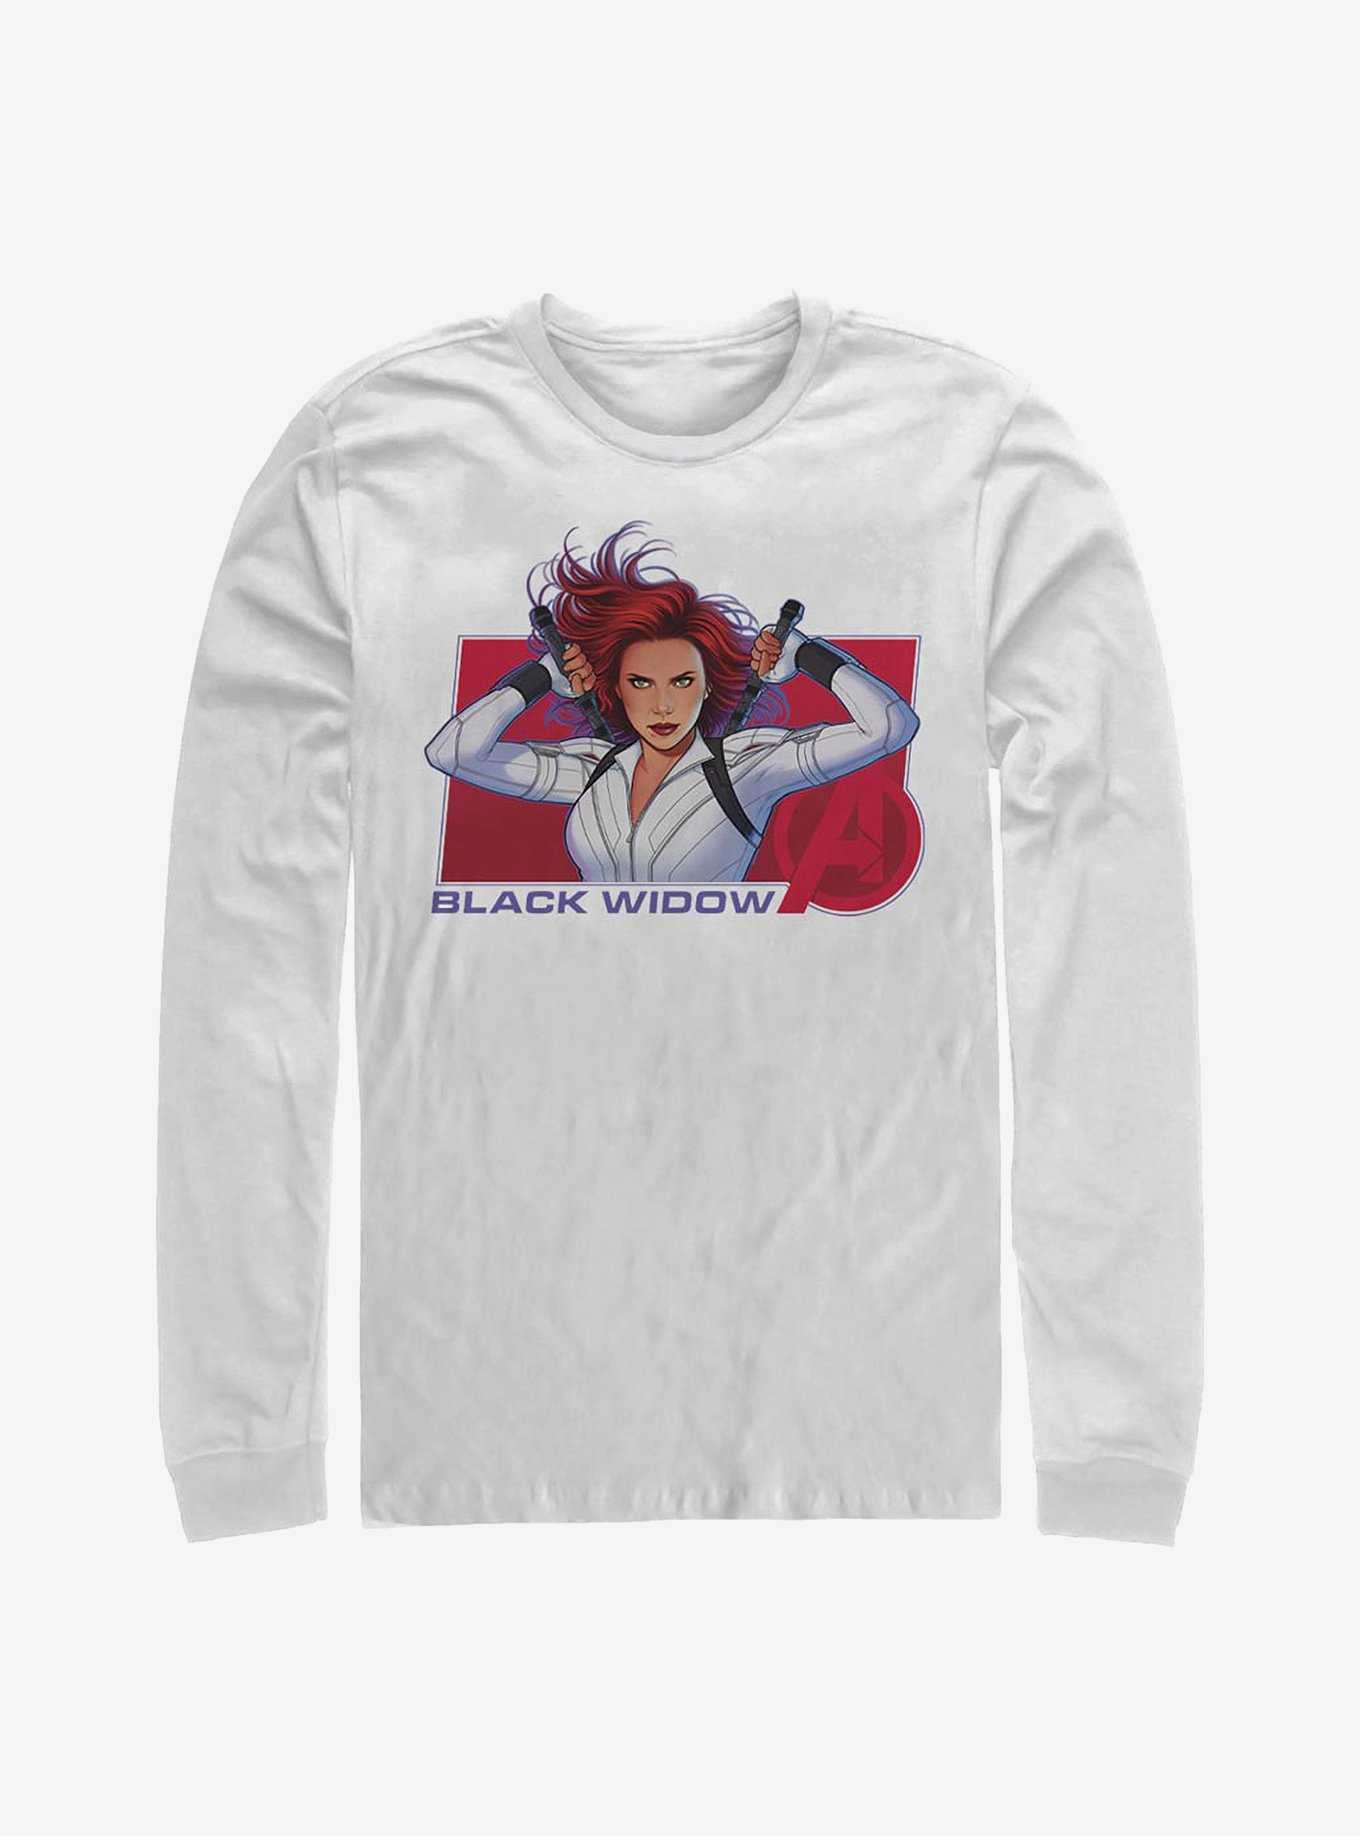 Marvel Black Widow Ready For Action Long-Sleeve T-Shirt, , hi-res